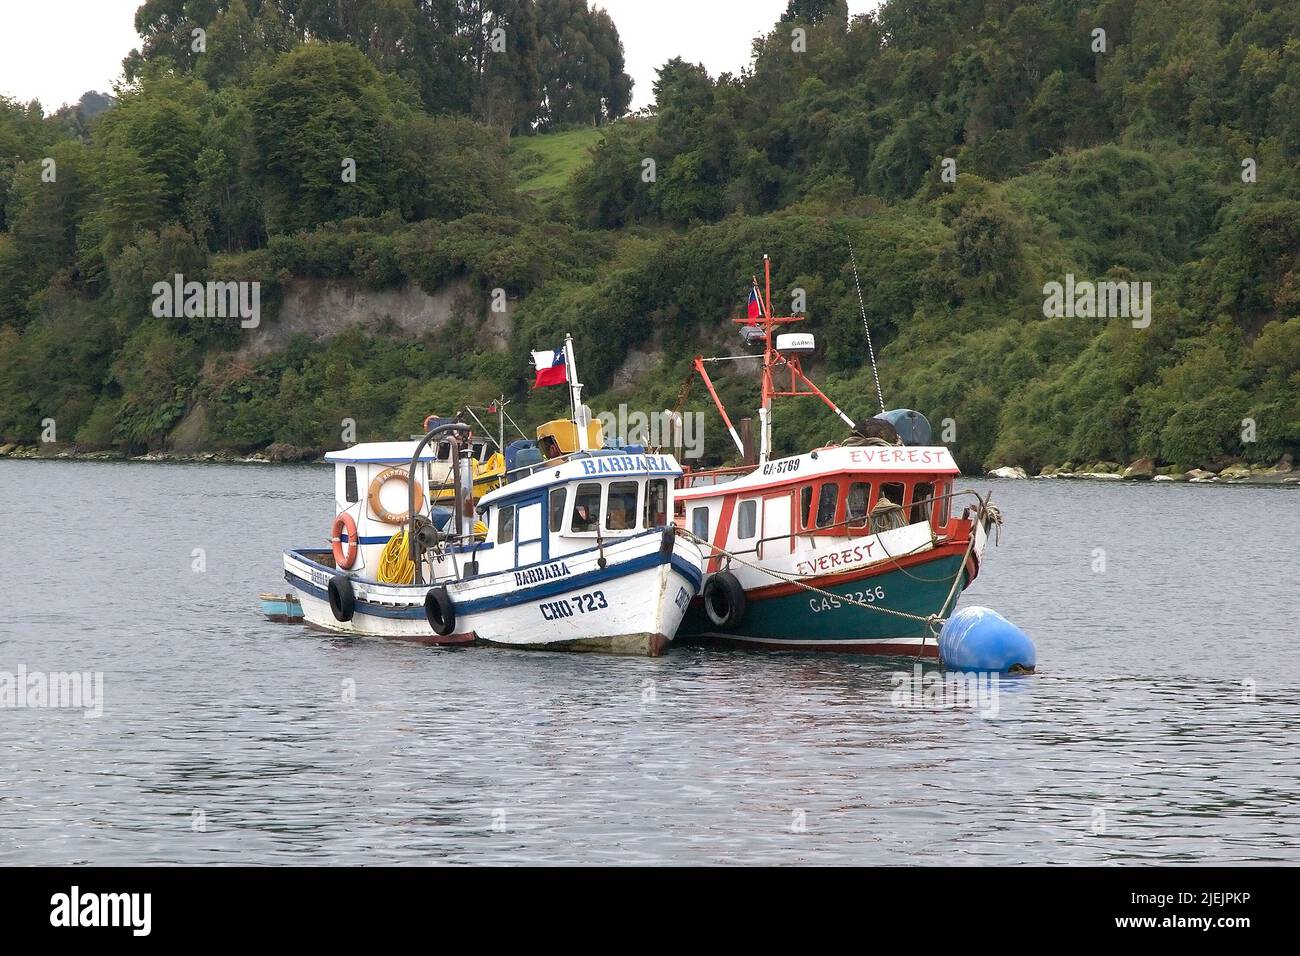 Traditional fishing boat at Achao, Quinchao Ilsand, Chiloe Archipelago, Chile Stock Photo